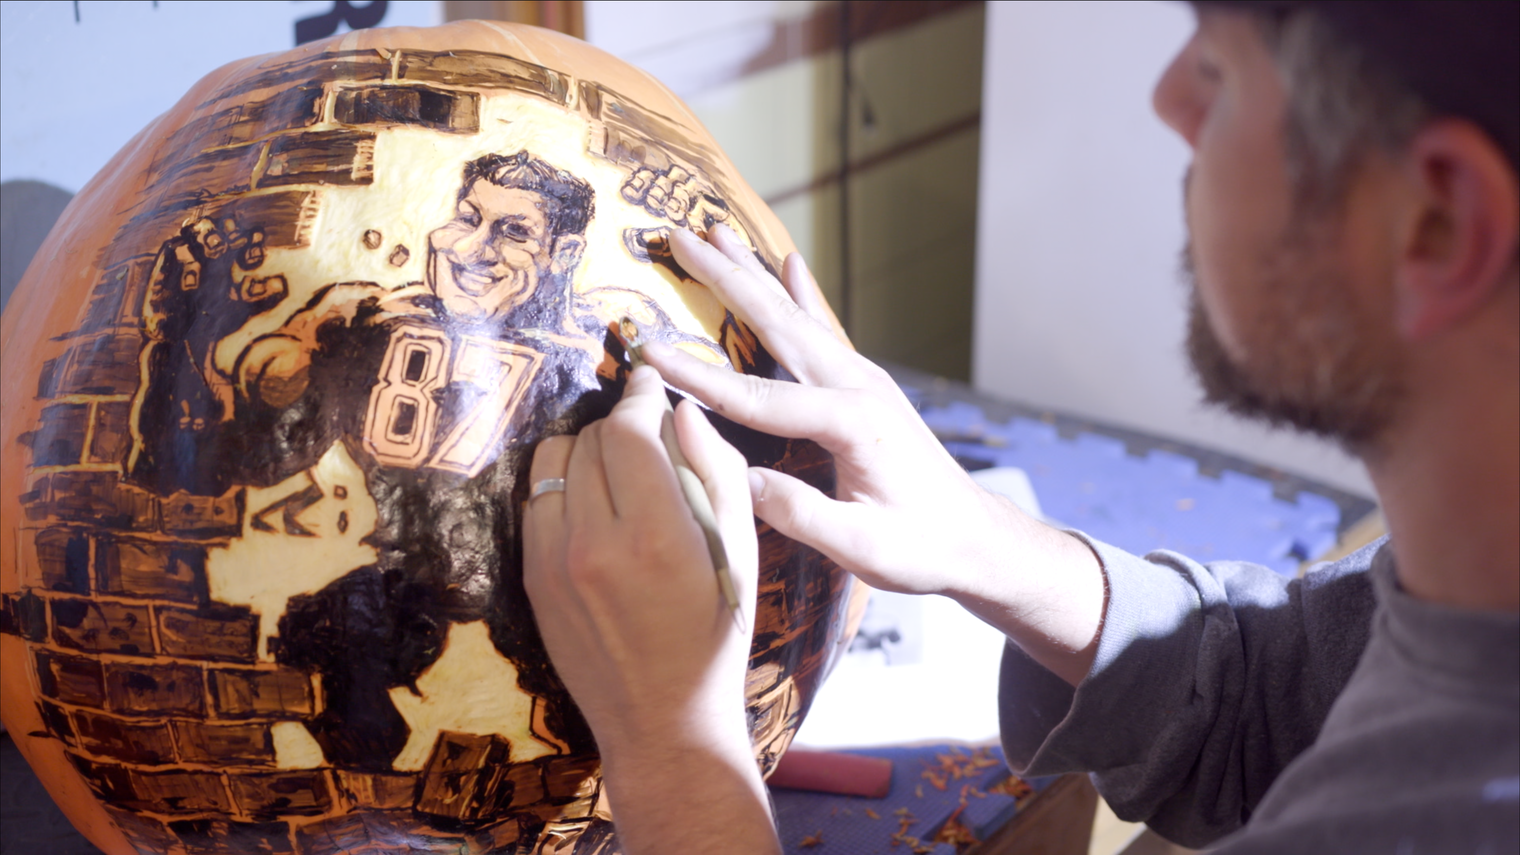 Artist carving a caricature of Rob Gronkowski, number 87, into a pumpkin.